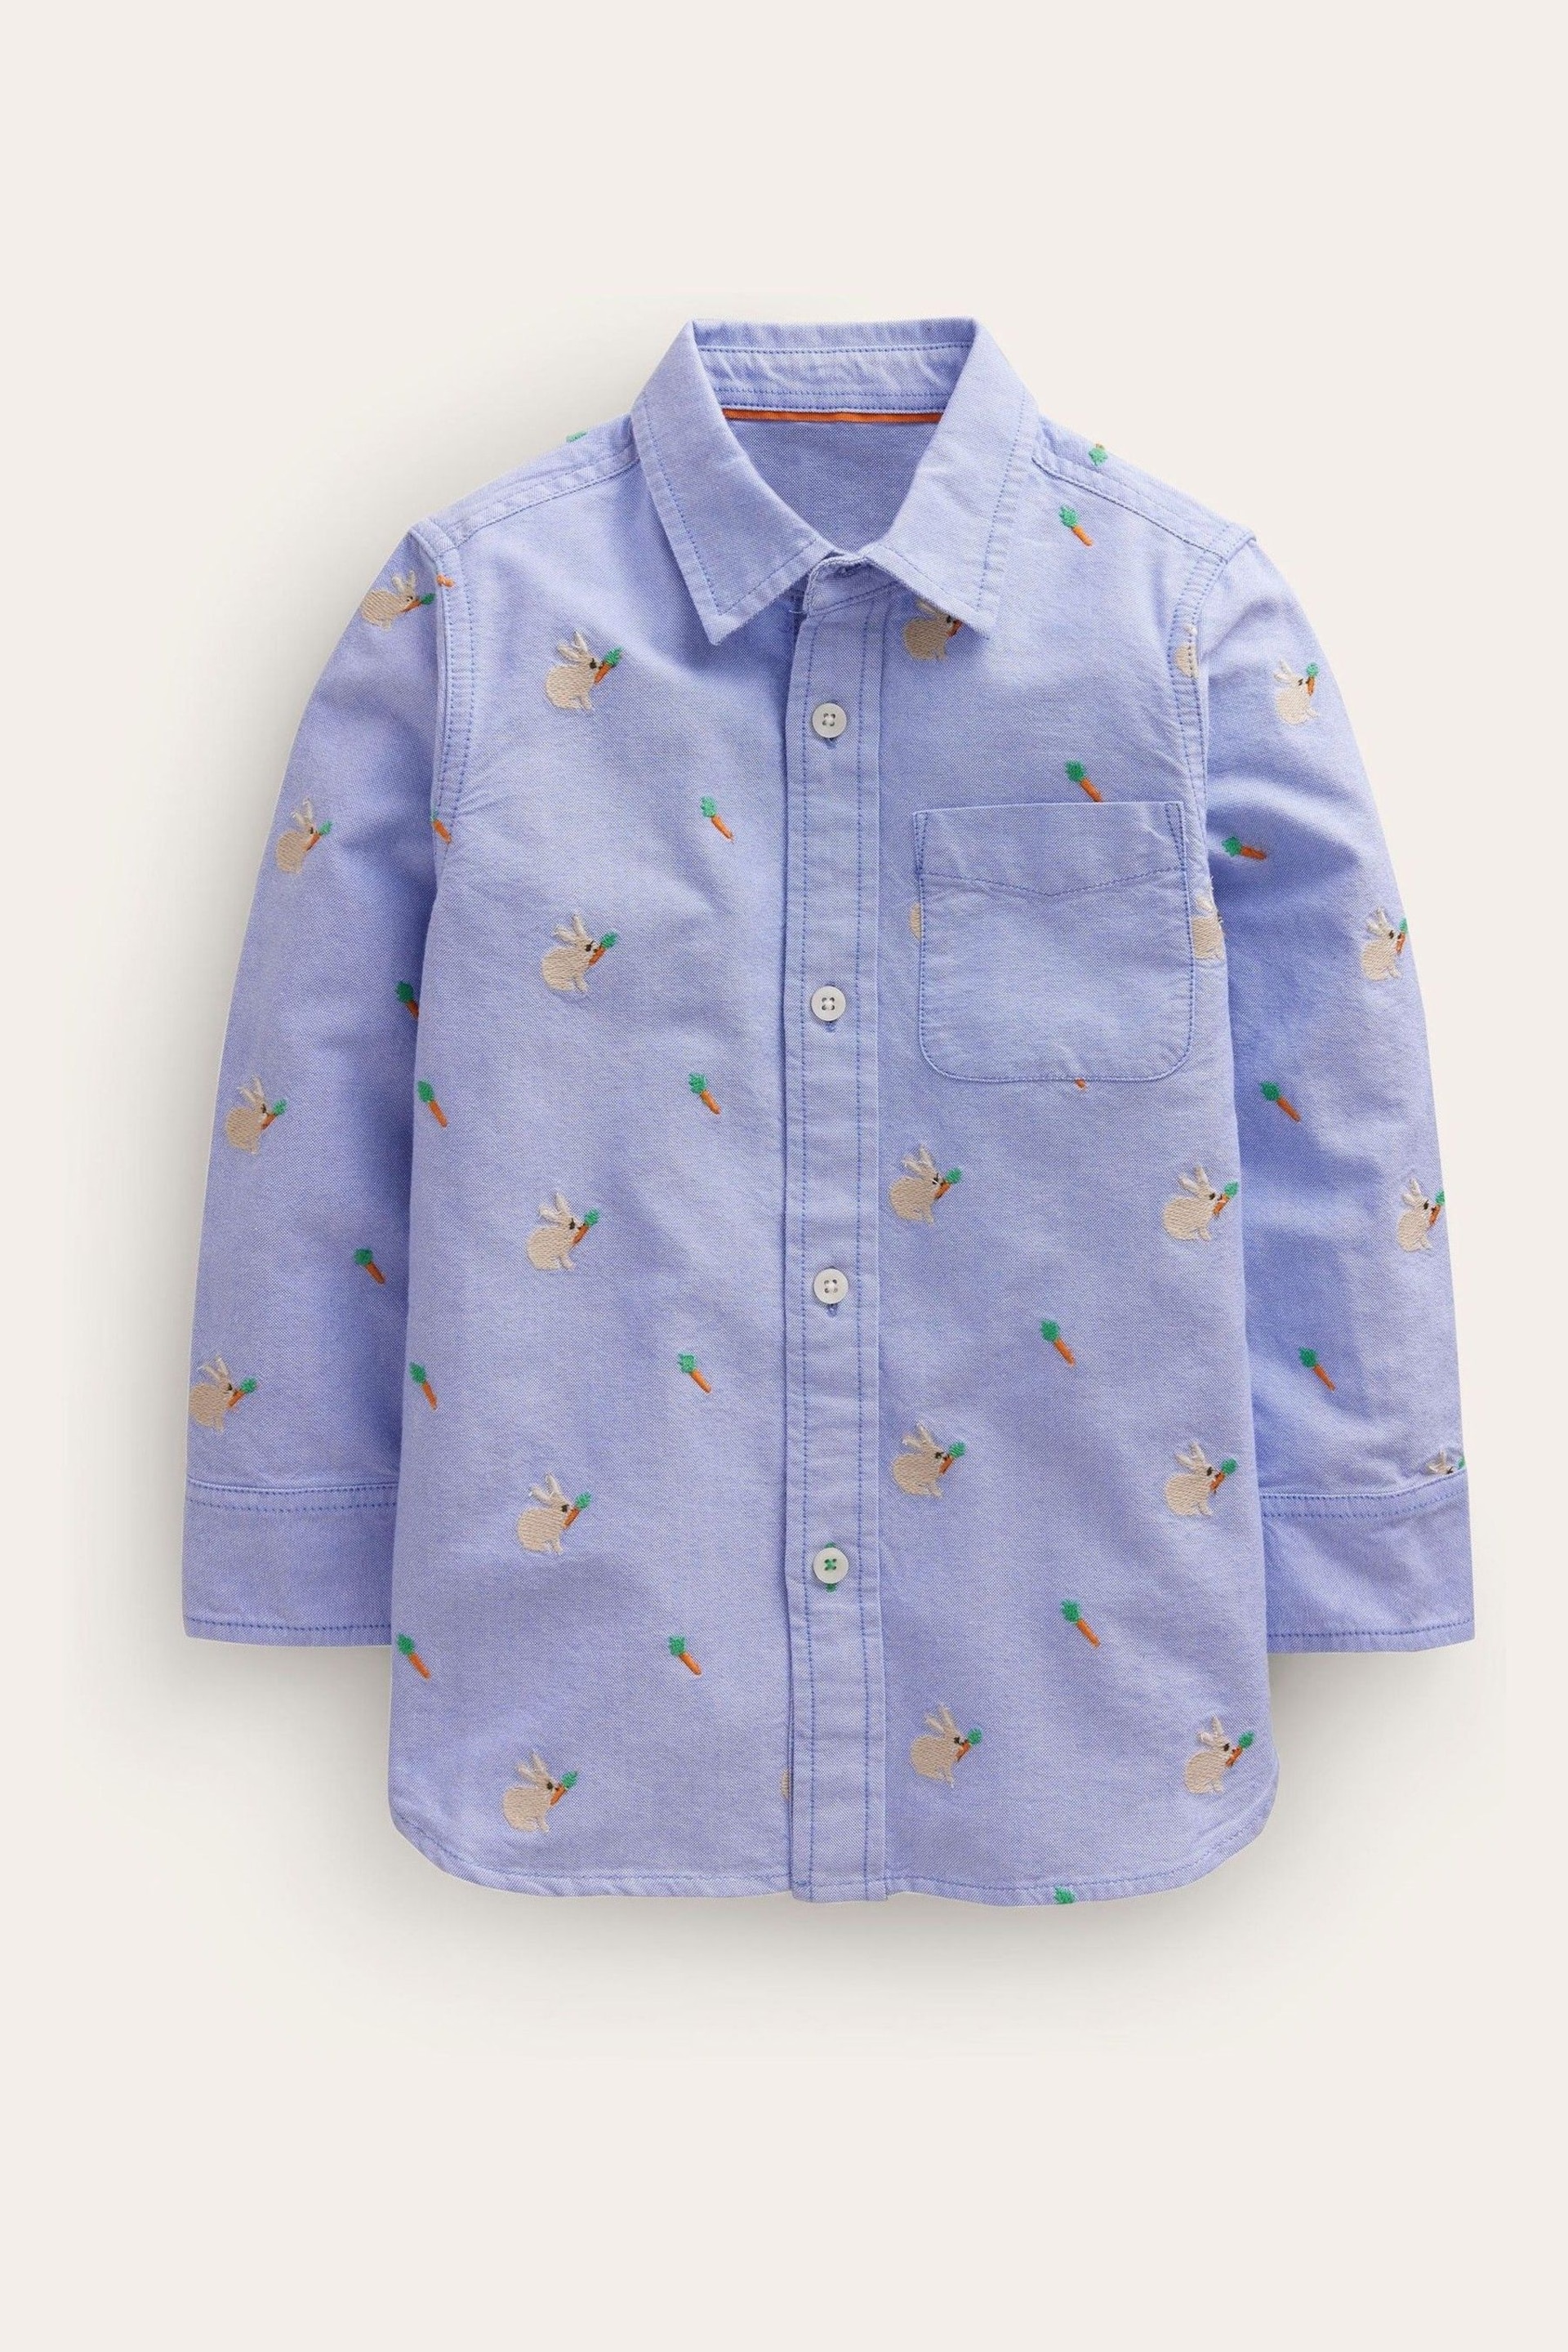 Boden Blue Bunny Embroidered Oxford Shirt - Image 1 of 3